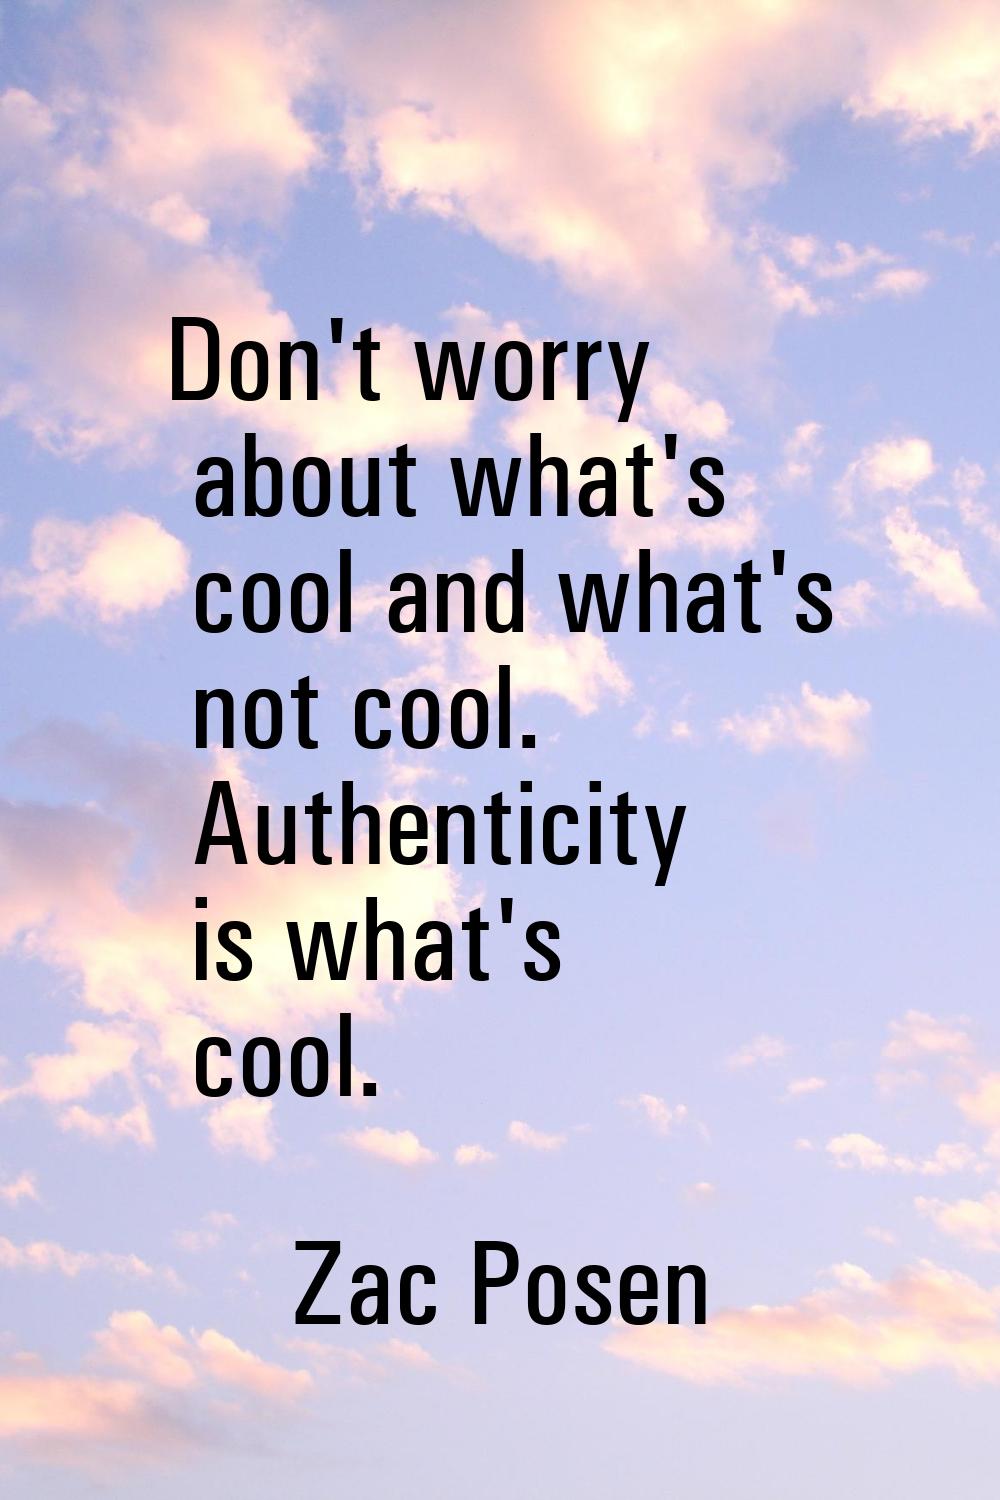 Don't worry about what's cool and what's not cool. Authenticity is what's cool.